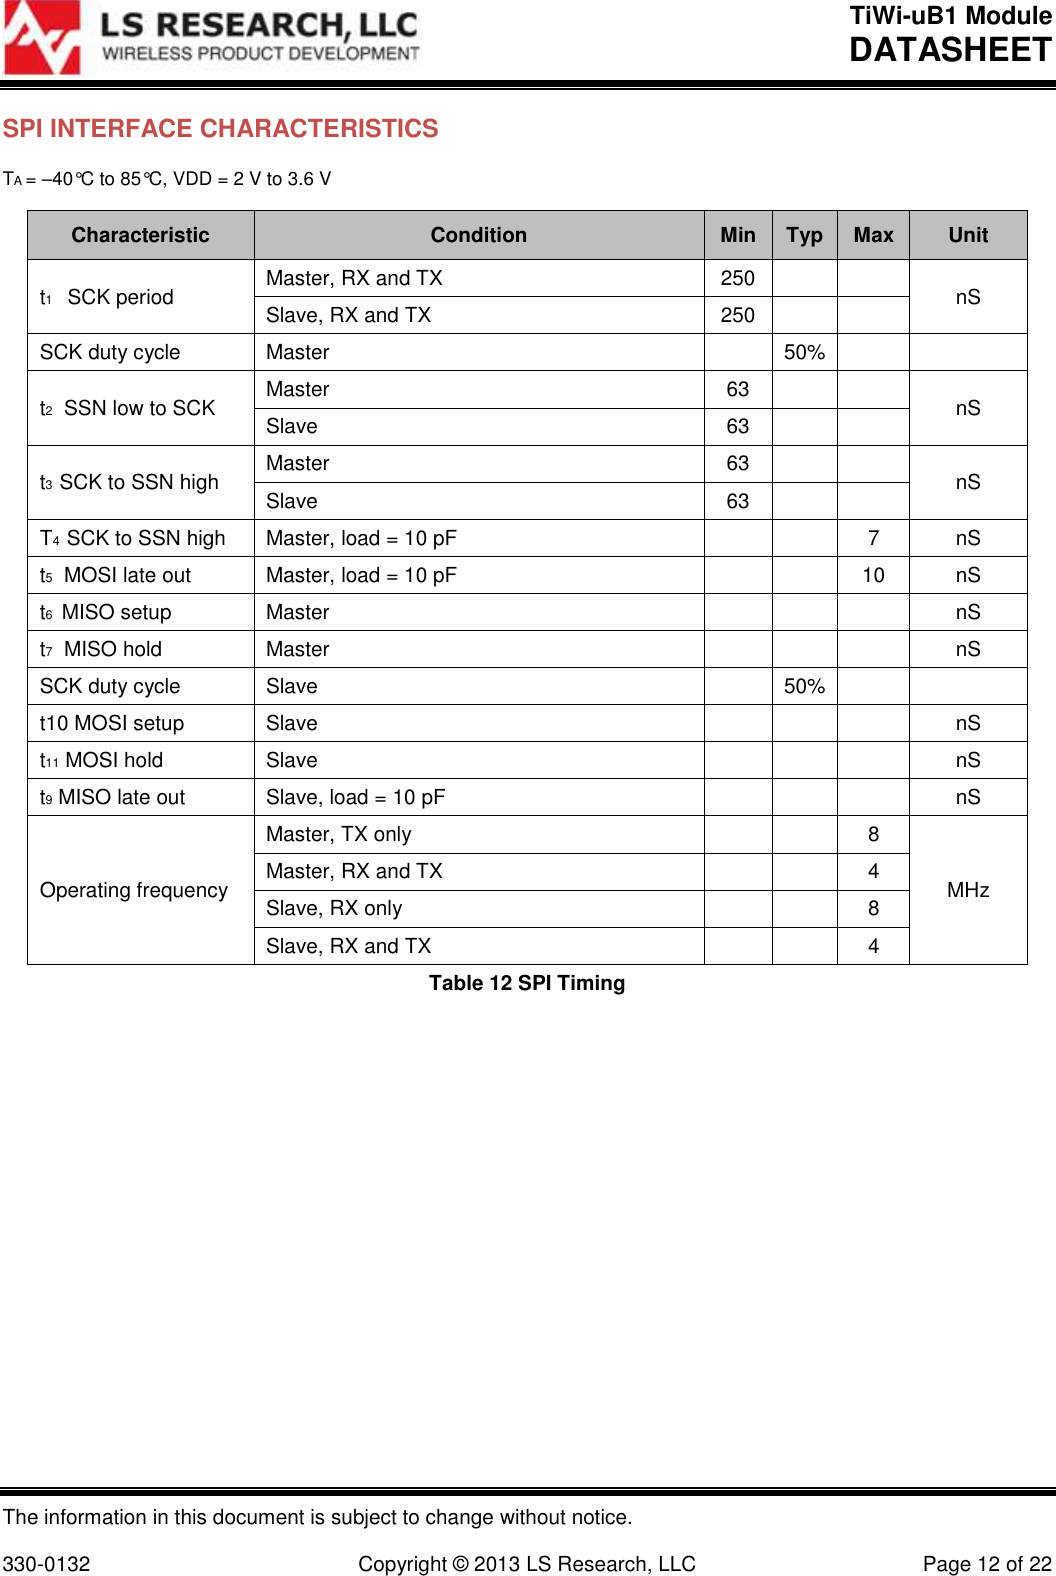 TiWi-uB1 Module DATASHEET  The information in this document is subject to change without notice.  330-0132  Copyright © 2013 LS Research, LLC  Page 12 of 22 SPI INTERFACE CHARACTERISTICS TA = –40°C to 85°C, VDD = 2 V to 3.6 V Characteristic Condition Min Typ Max Unit t1   SCK period Master, RX and TX 250   nS Slave, RX and TX 250   SCK duty cycle Master  50%   t2  SSN low to SCK Master 63   nS Slave 63   t3  SCK to SSN high Master 63   nS Slave 63   T4  SCK to SSN high Master, load = 10 pF   7 nS t5  MOSI late out Master, load = 10 pF   10 nS t6  MISO setup Master    nS t7  MISO hold Master    nS SCK duty cycle Slave  50%   t10 MOSI setup Slave    nS t11 MOSI hold Slave    nS t9 MISO late out Slave, load = 10 pF    nS Operating frequency Master, TX only   8 MHz Master, RX and TX   4 Slave, RX only   8 Slave, RX and TX   4 Table 12 SPI Timing  